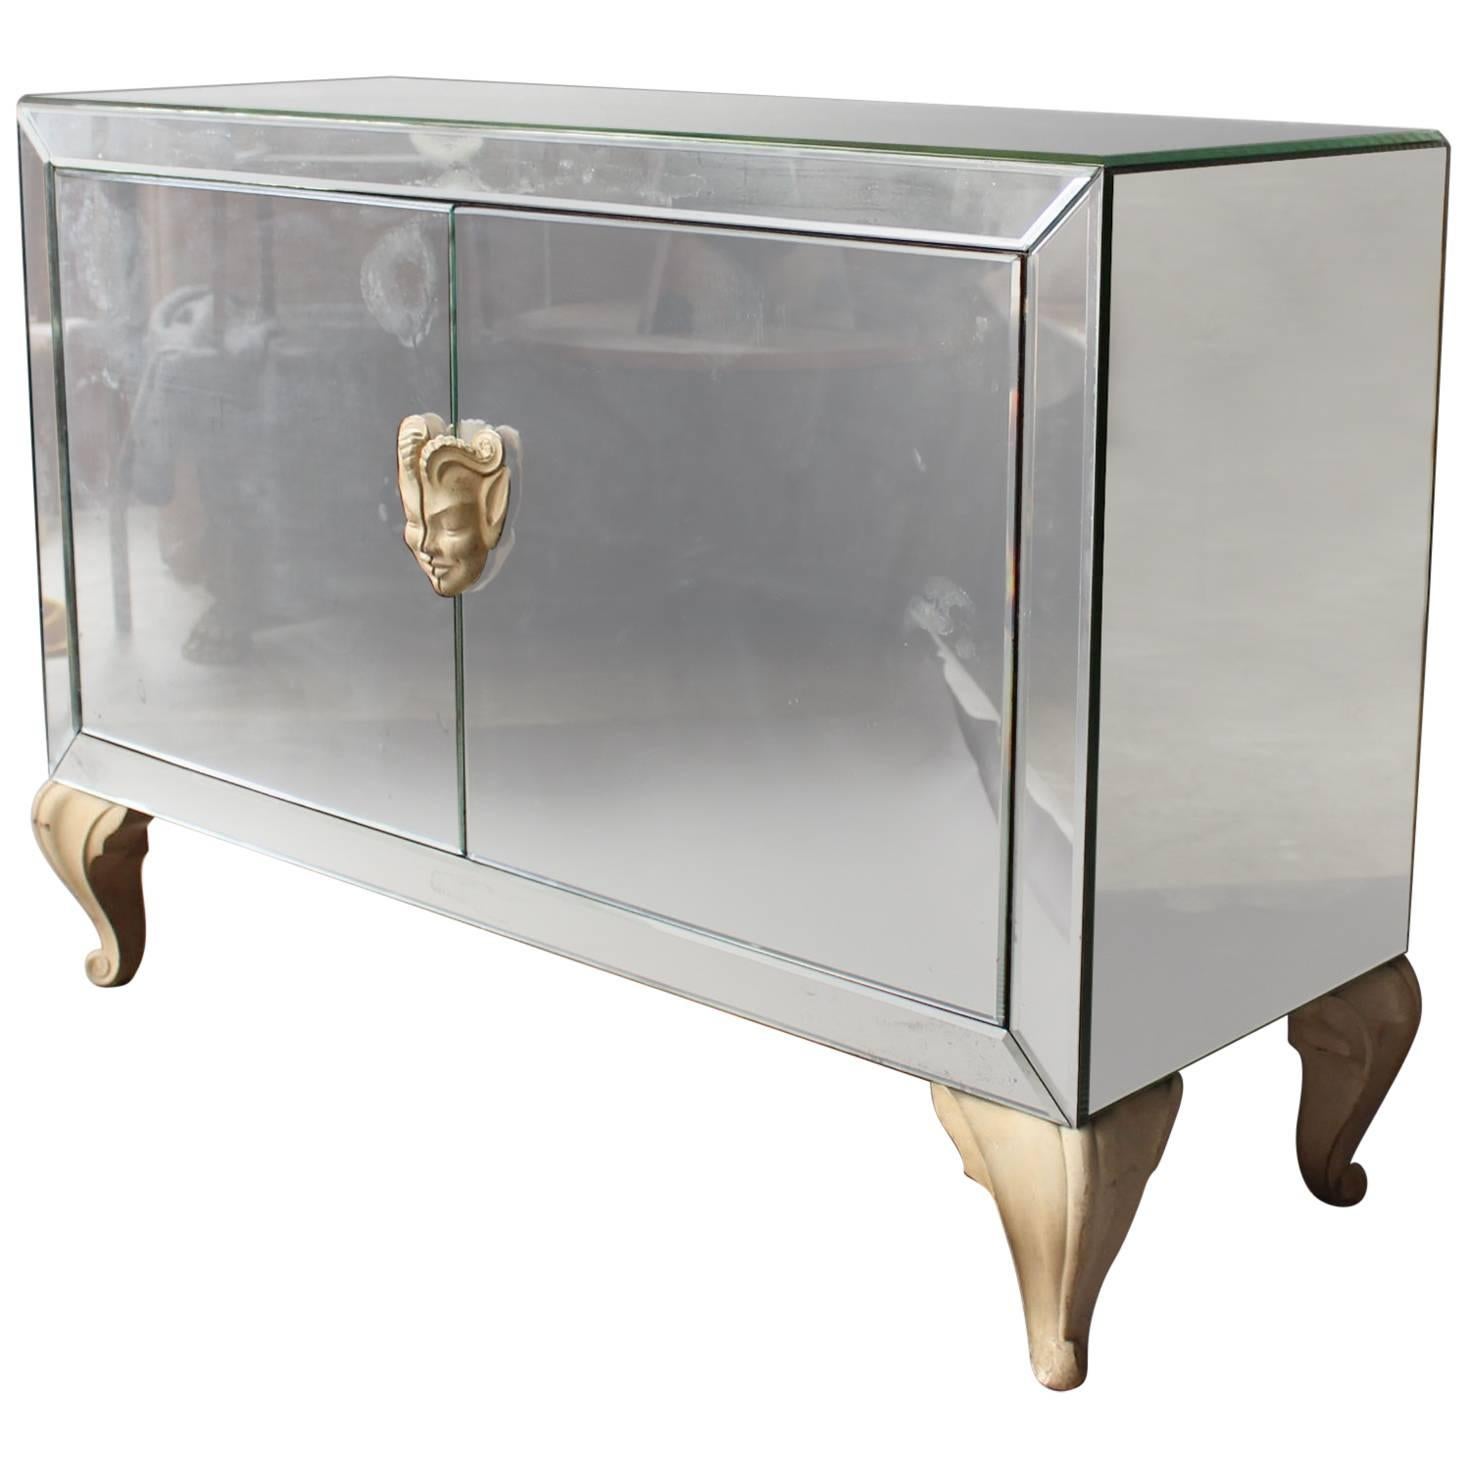 Fine French Art Deco Mirrored Buffet or Commode with Wooden Legs and Handles For Sale